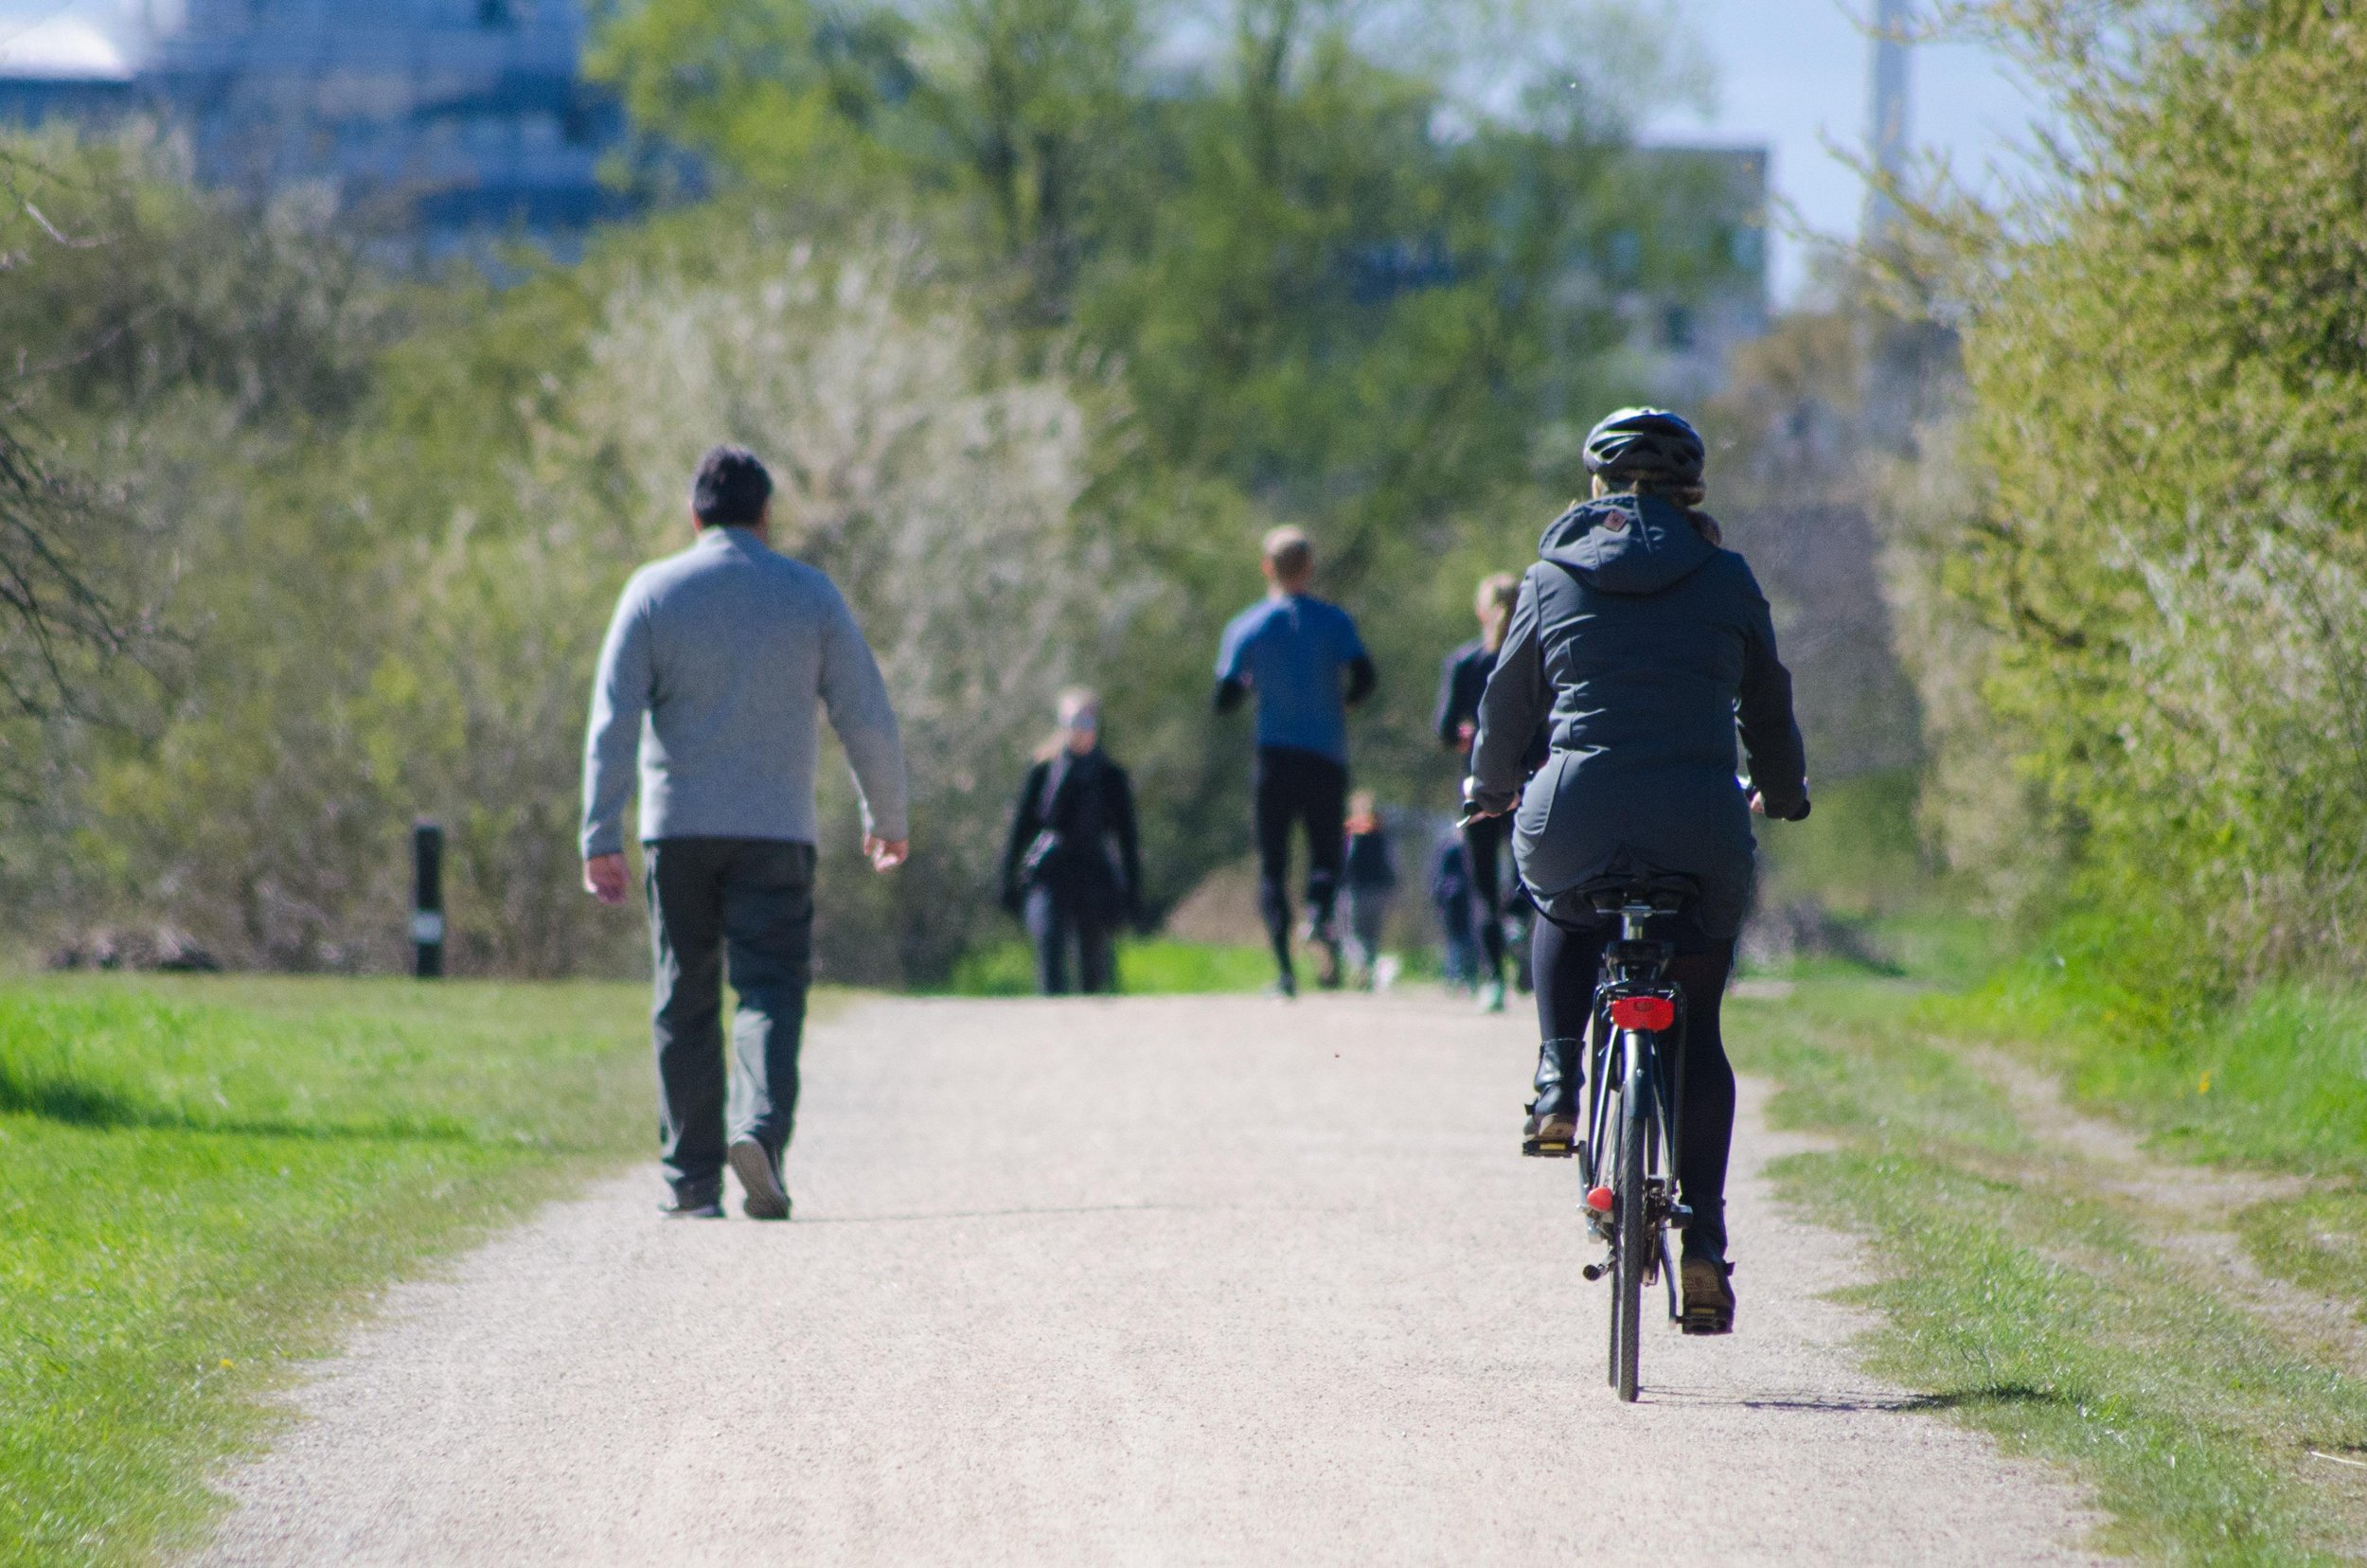 Walkers, joggers, and bikers enjoy a park trail with skyscrapers in the background